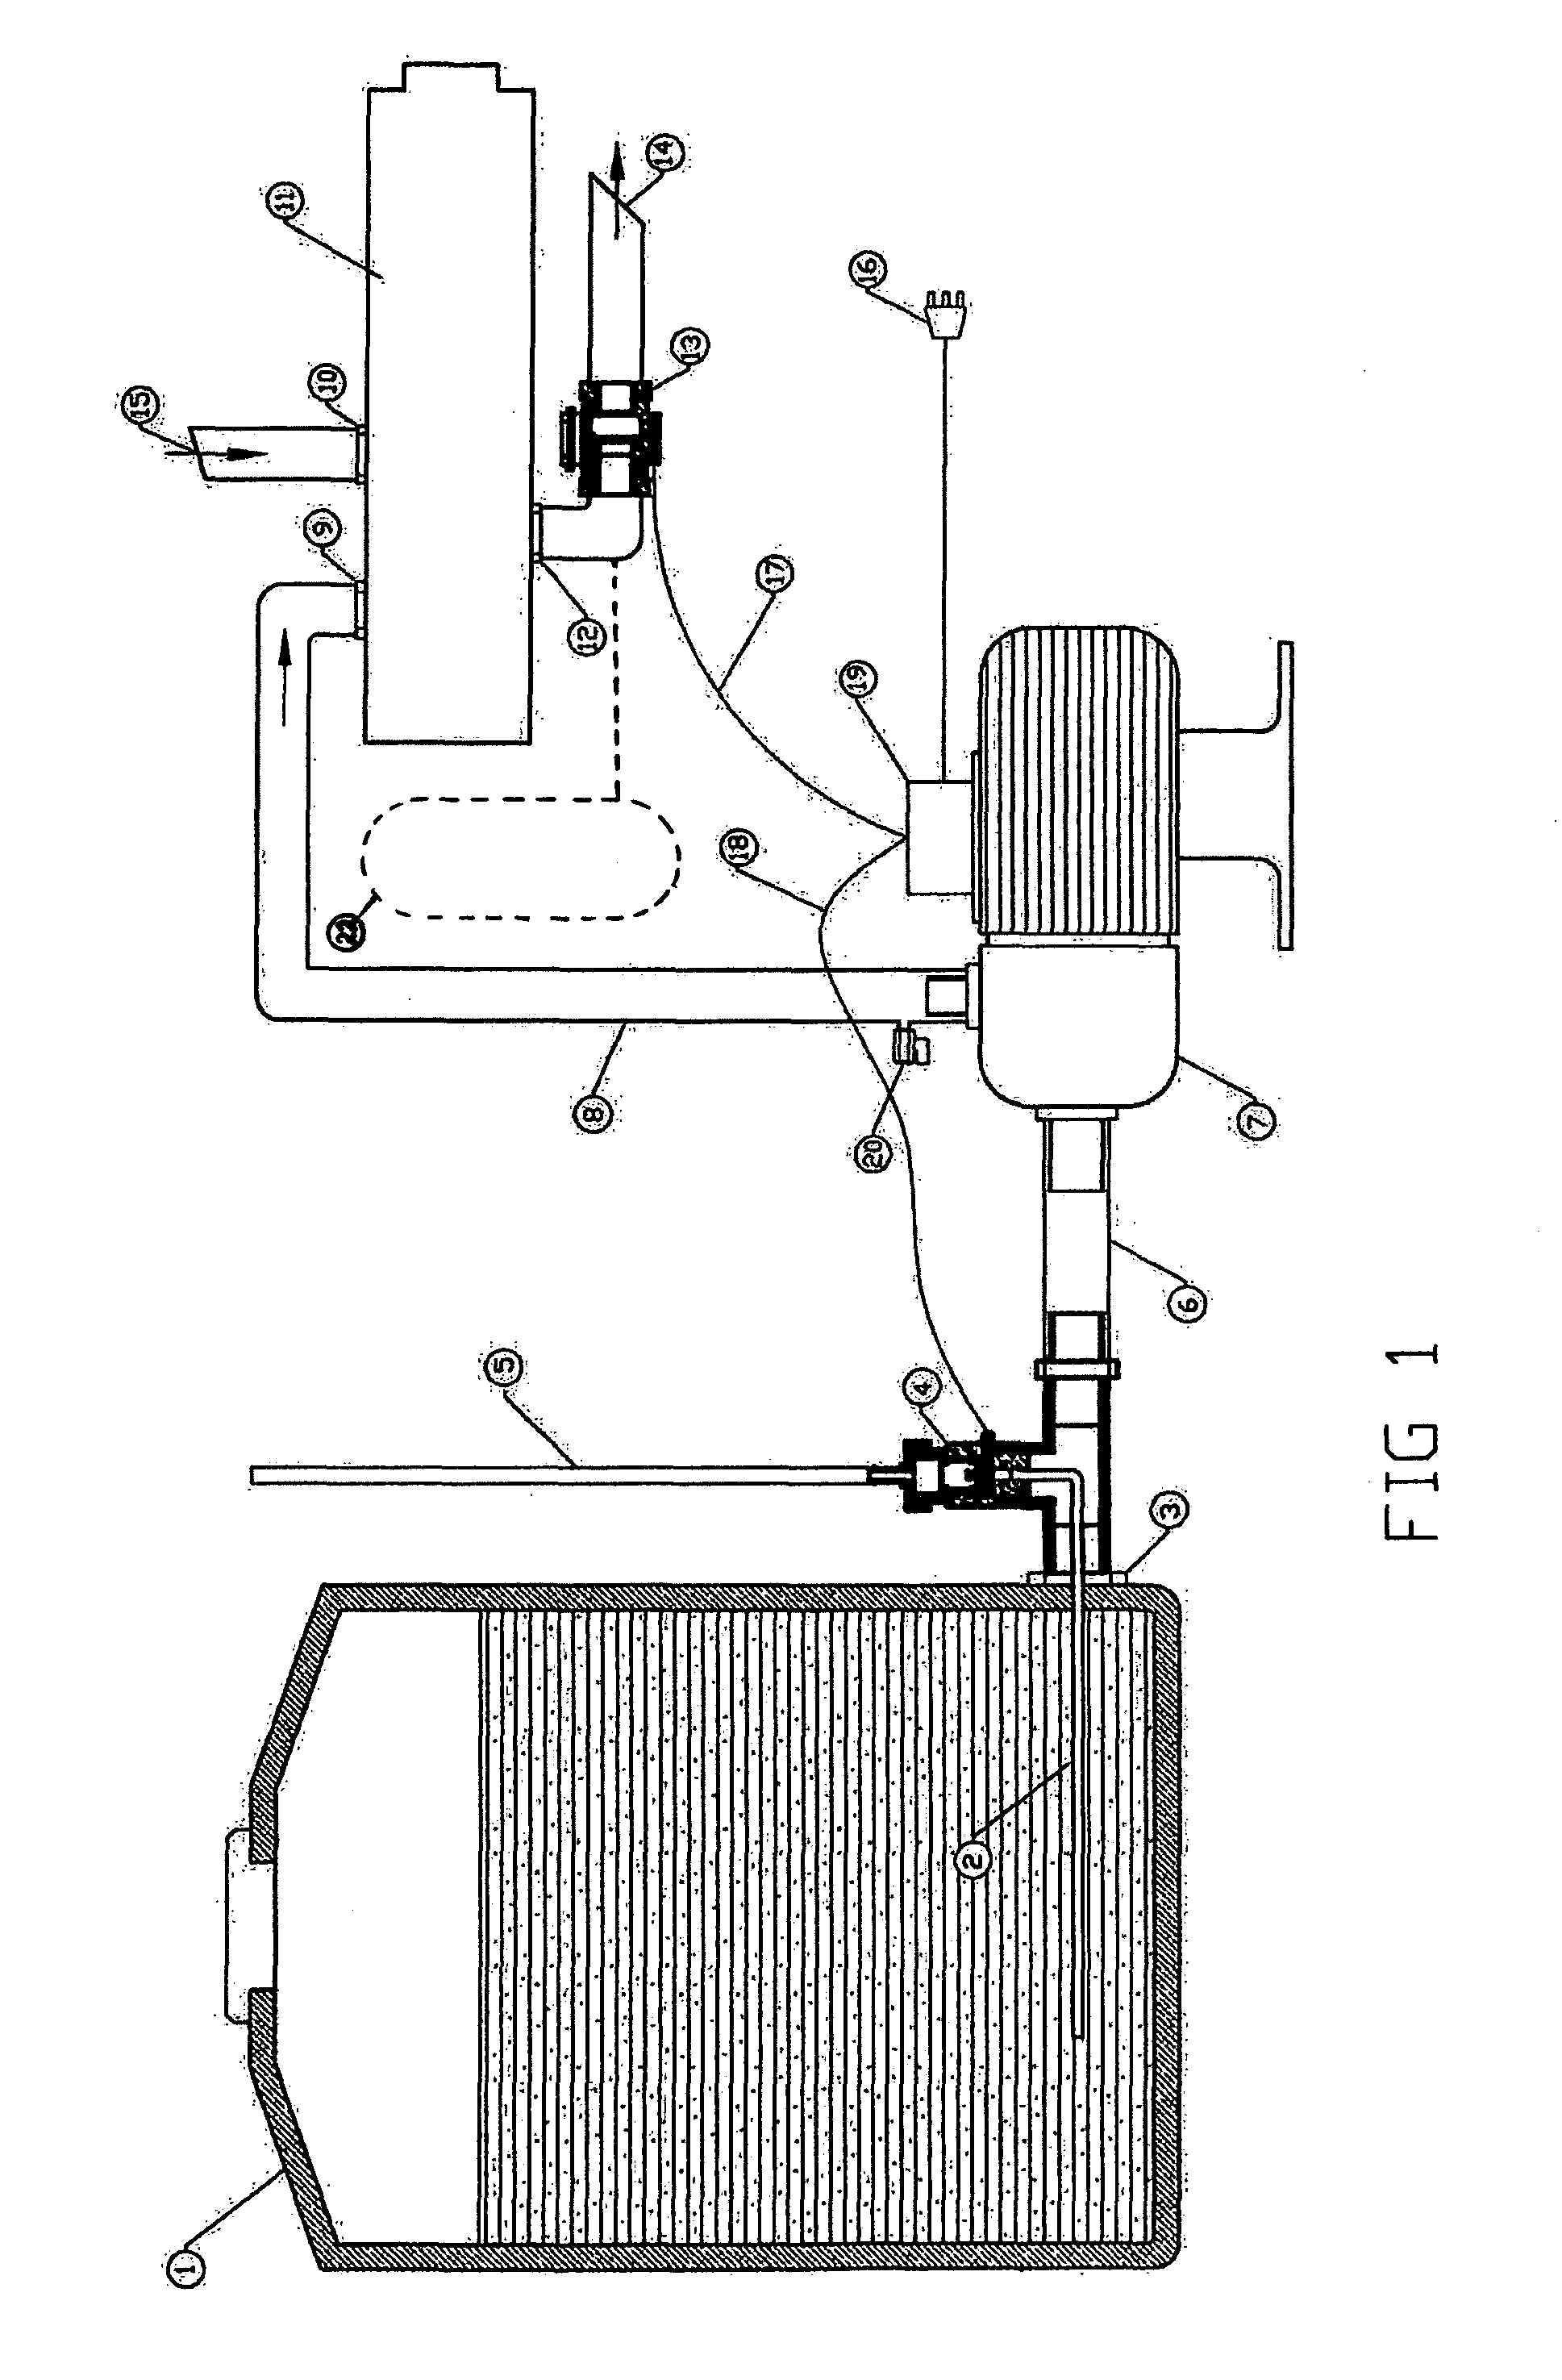 Auxiliary tank and mains water supply system